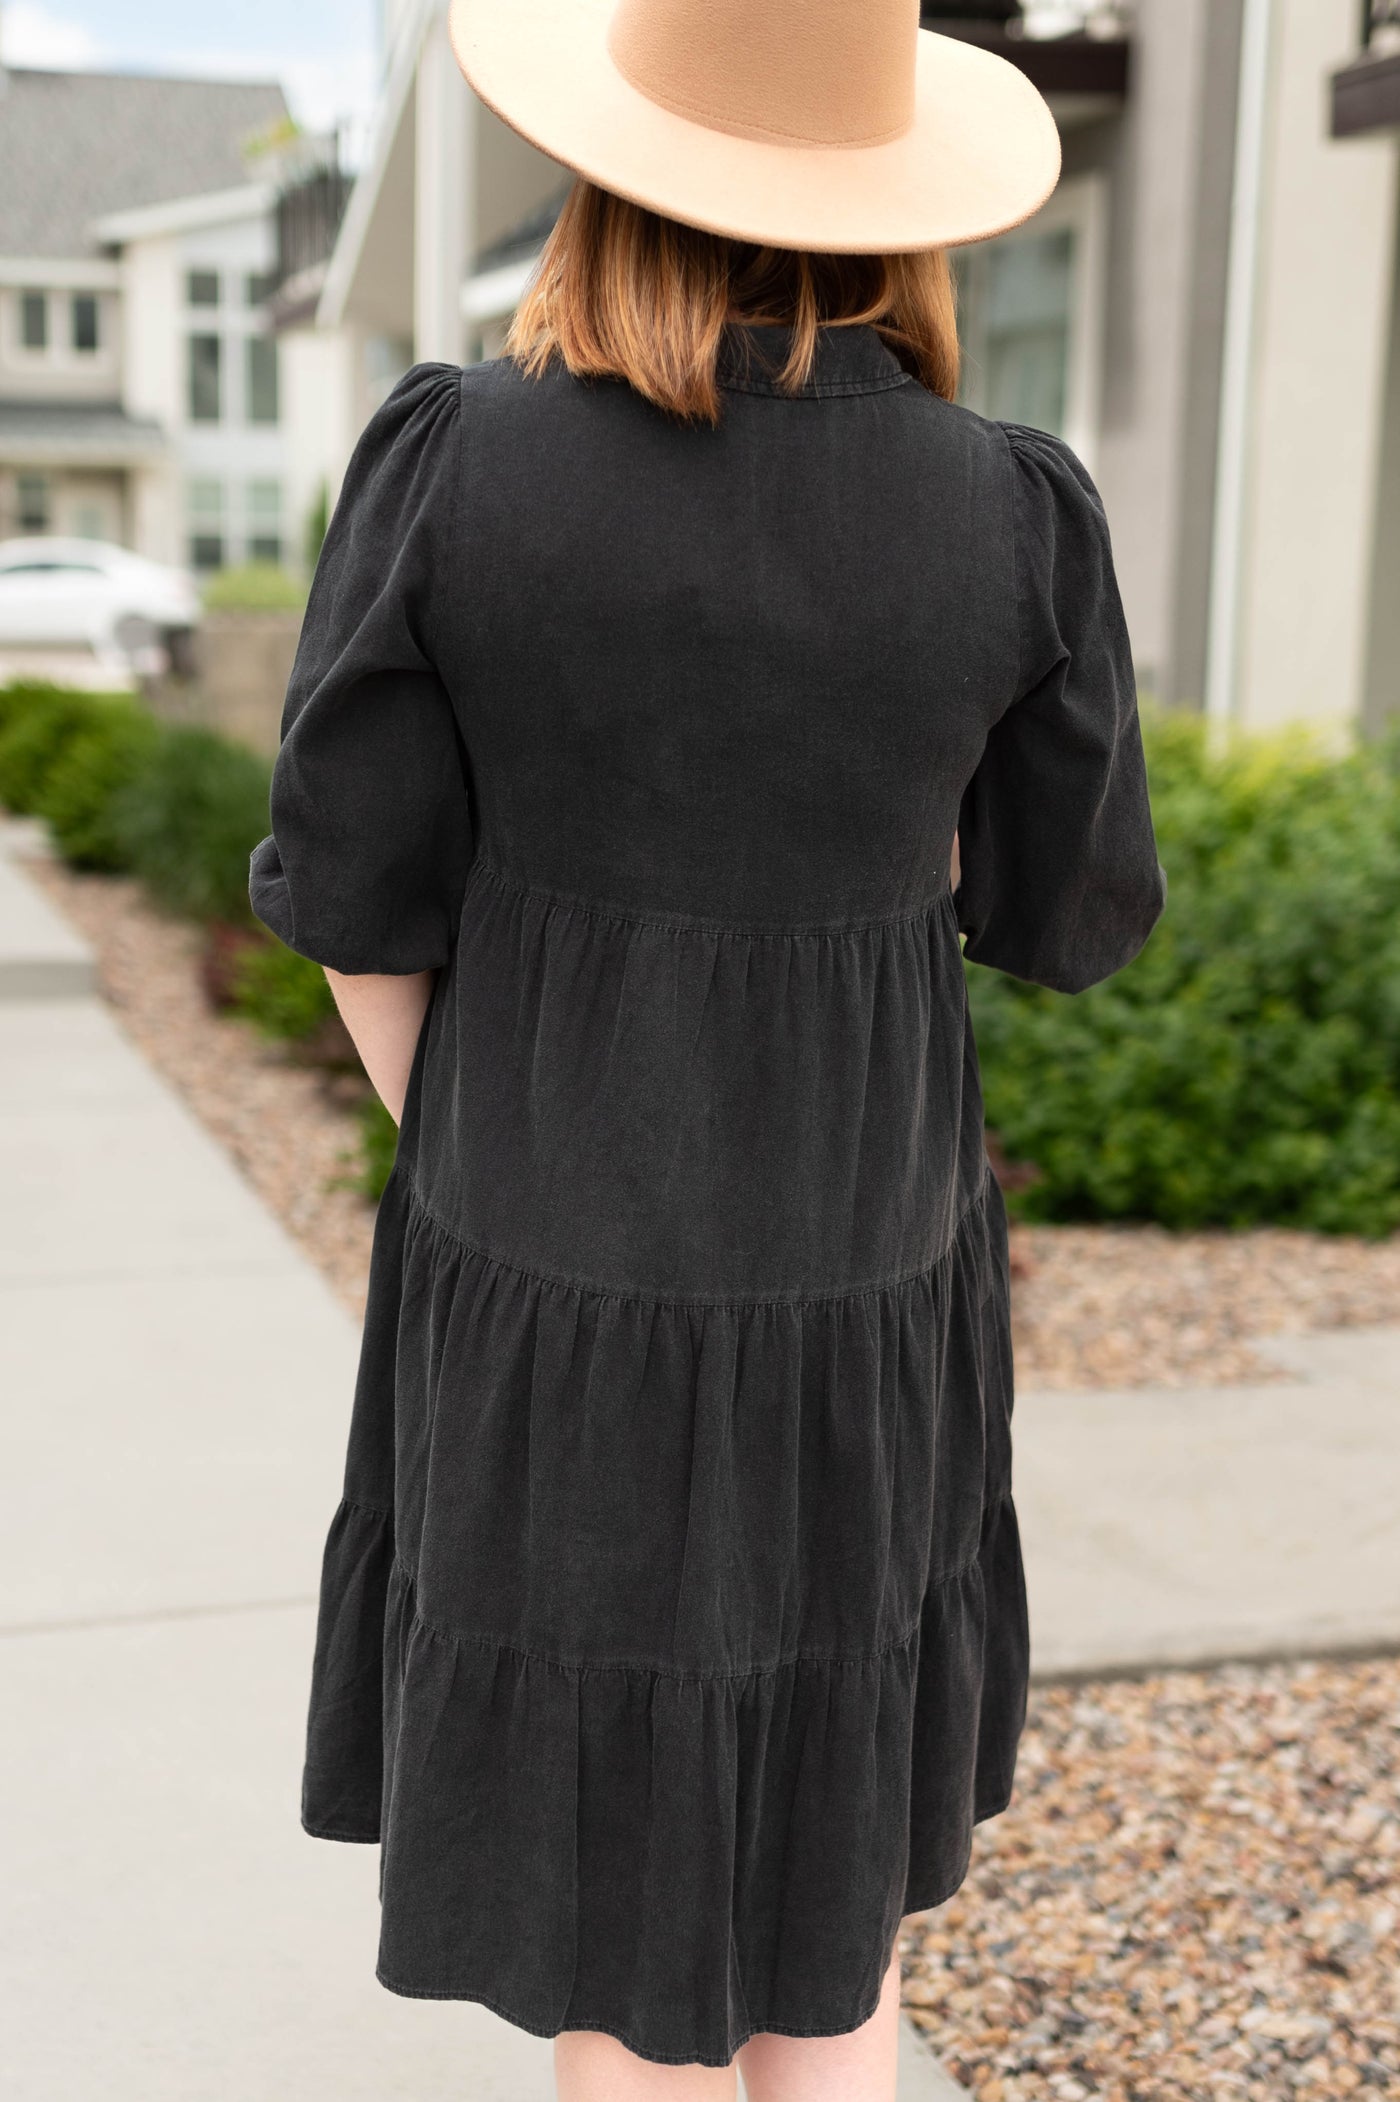 Back view of a black dress with a collar